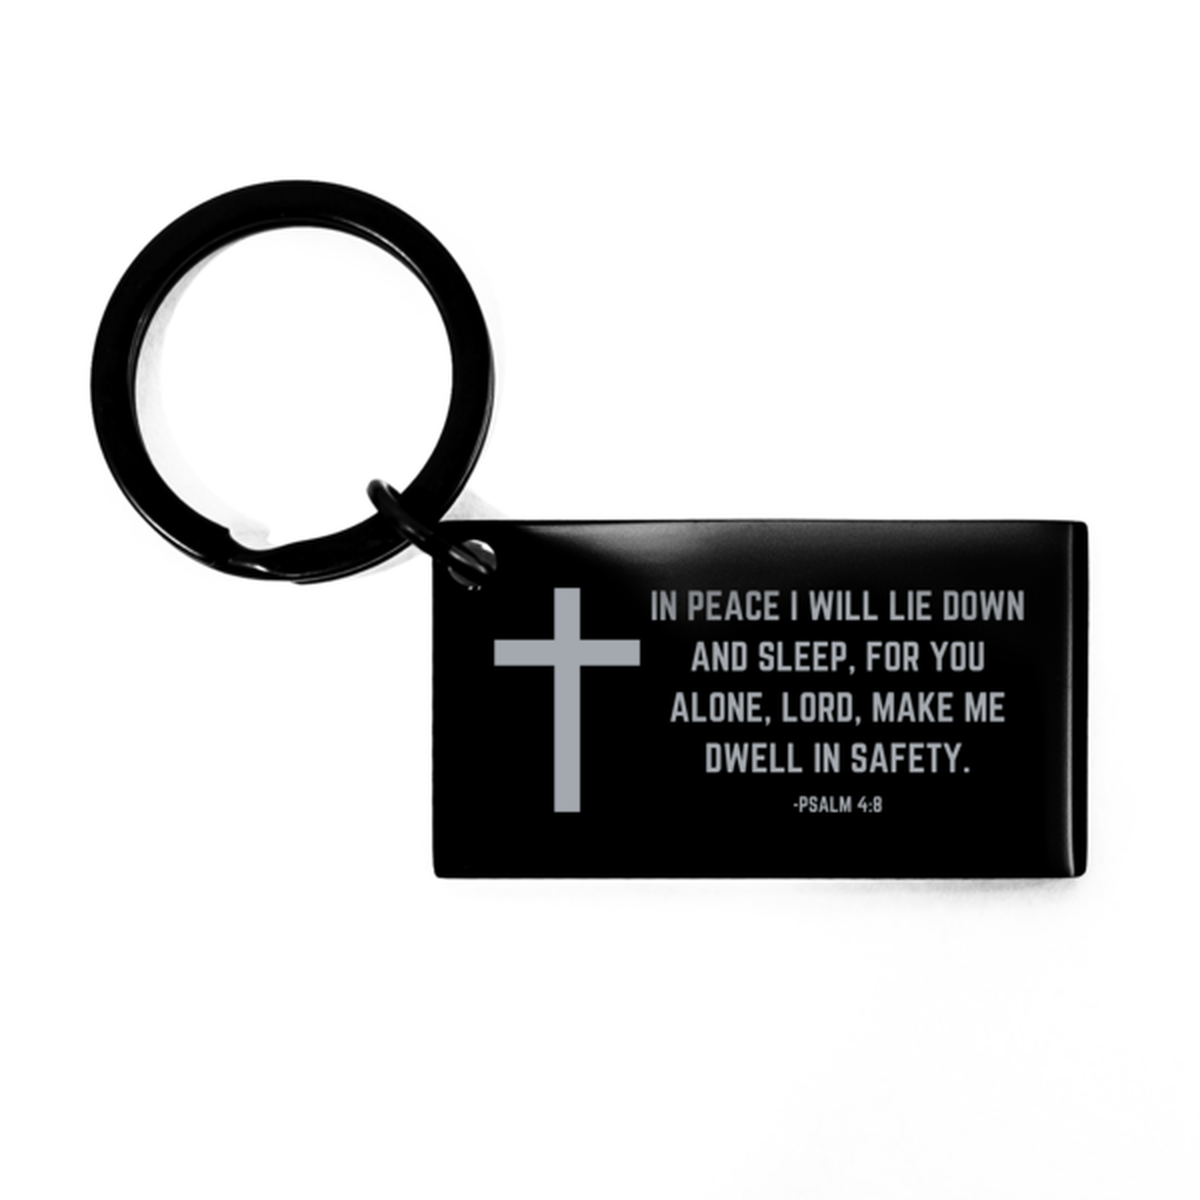 Baptism Gifts For Teenage Boys Girls, Christian Bible Verse Black Keychain, In peace I will lie down and sleep, Confirmation Gifts, Bible Verse Keyring for Son, Godson, Grandson, Nephew